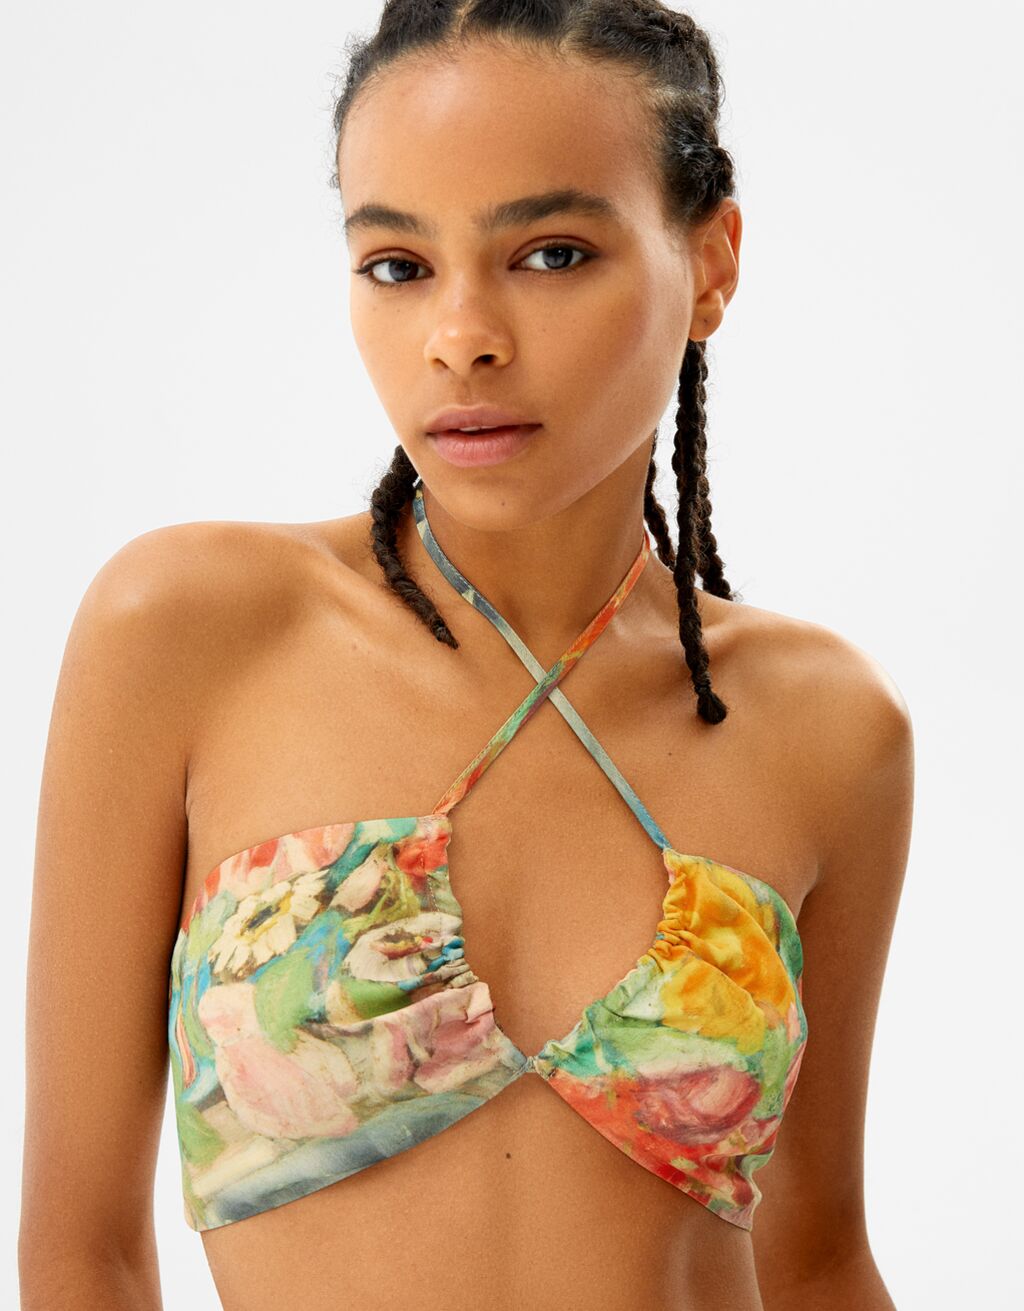 Art Series strappy satin finish top with floral print